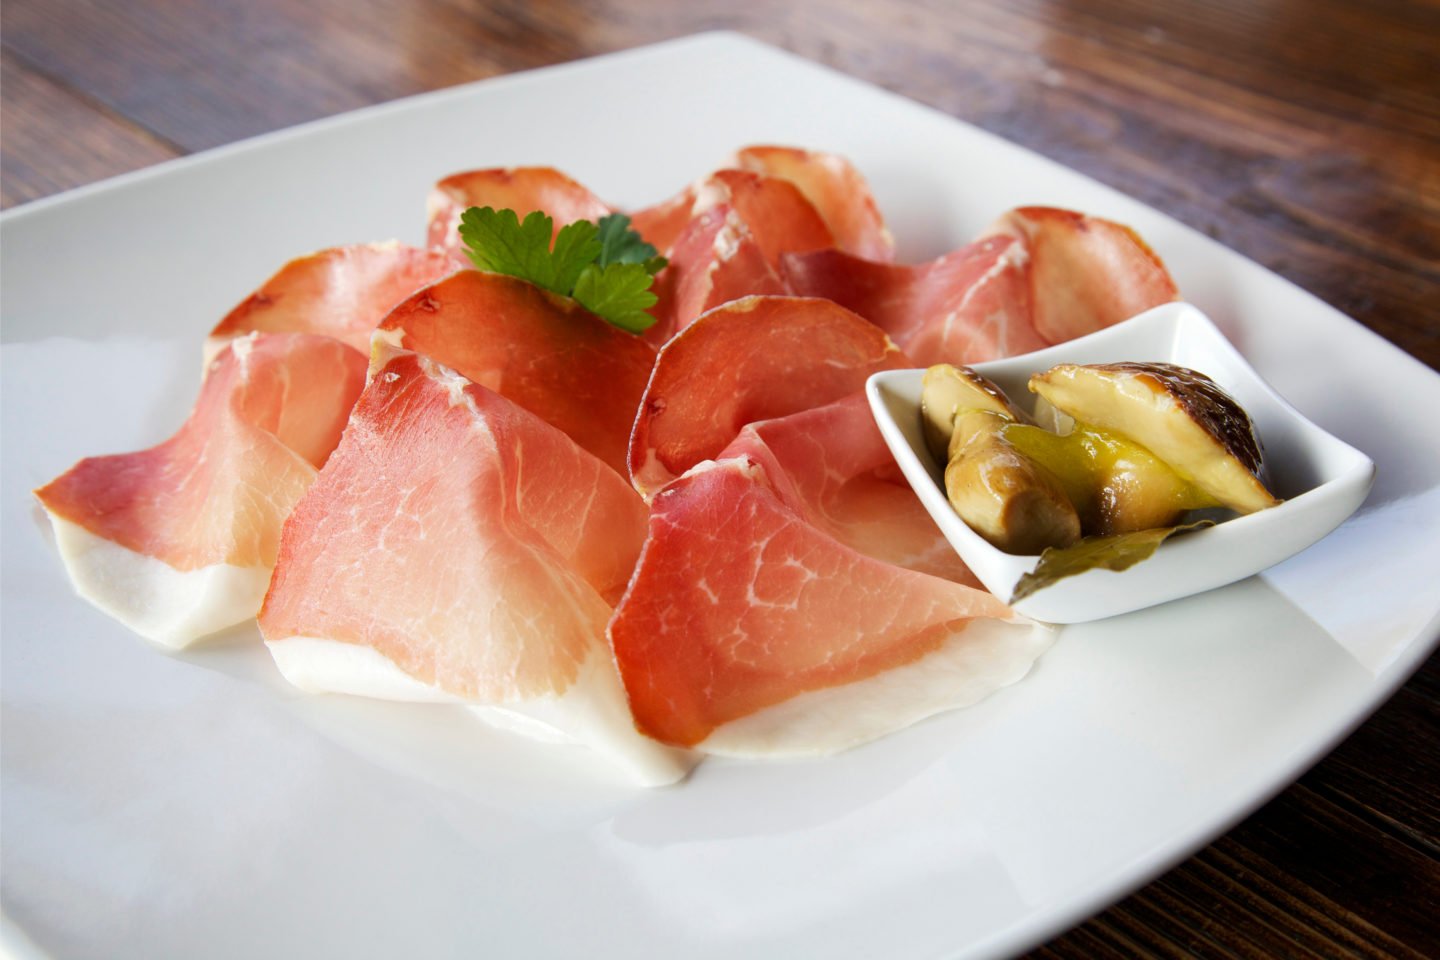 slices of culatello on plate